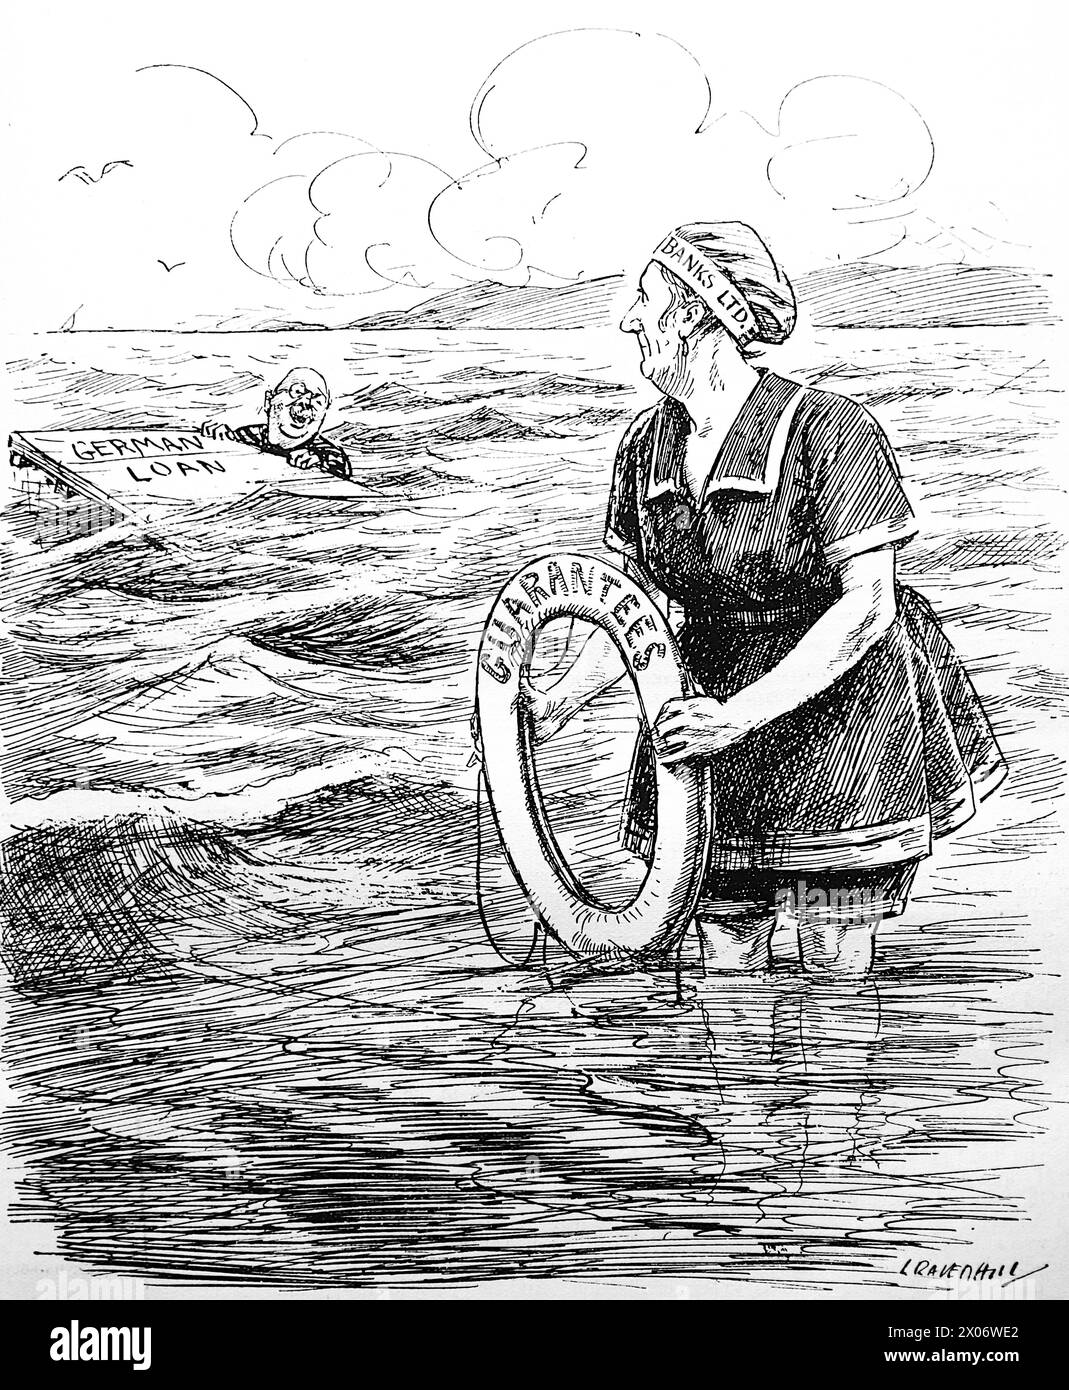 Safety First by Leonard Raven Hill, 13 August 1924, referring to German requests for bank loans. Photograph from a line drawing originally printed in the Punch and London Charivari periodical in 1924. This is a good example of the skilful artists and the humour and satire of the time. Stock Photo